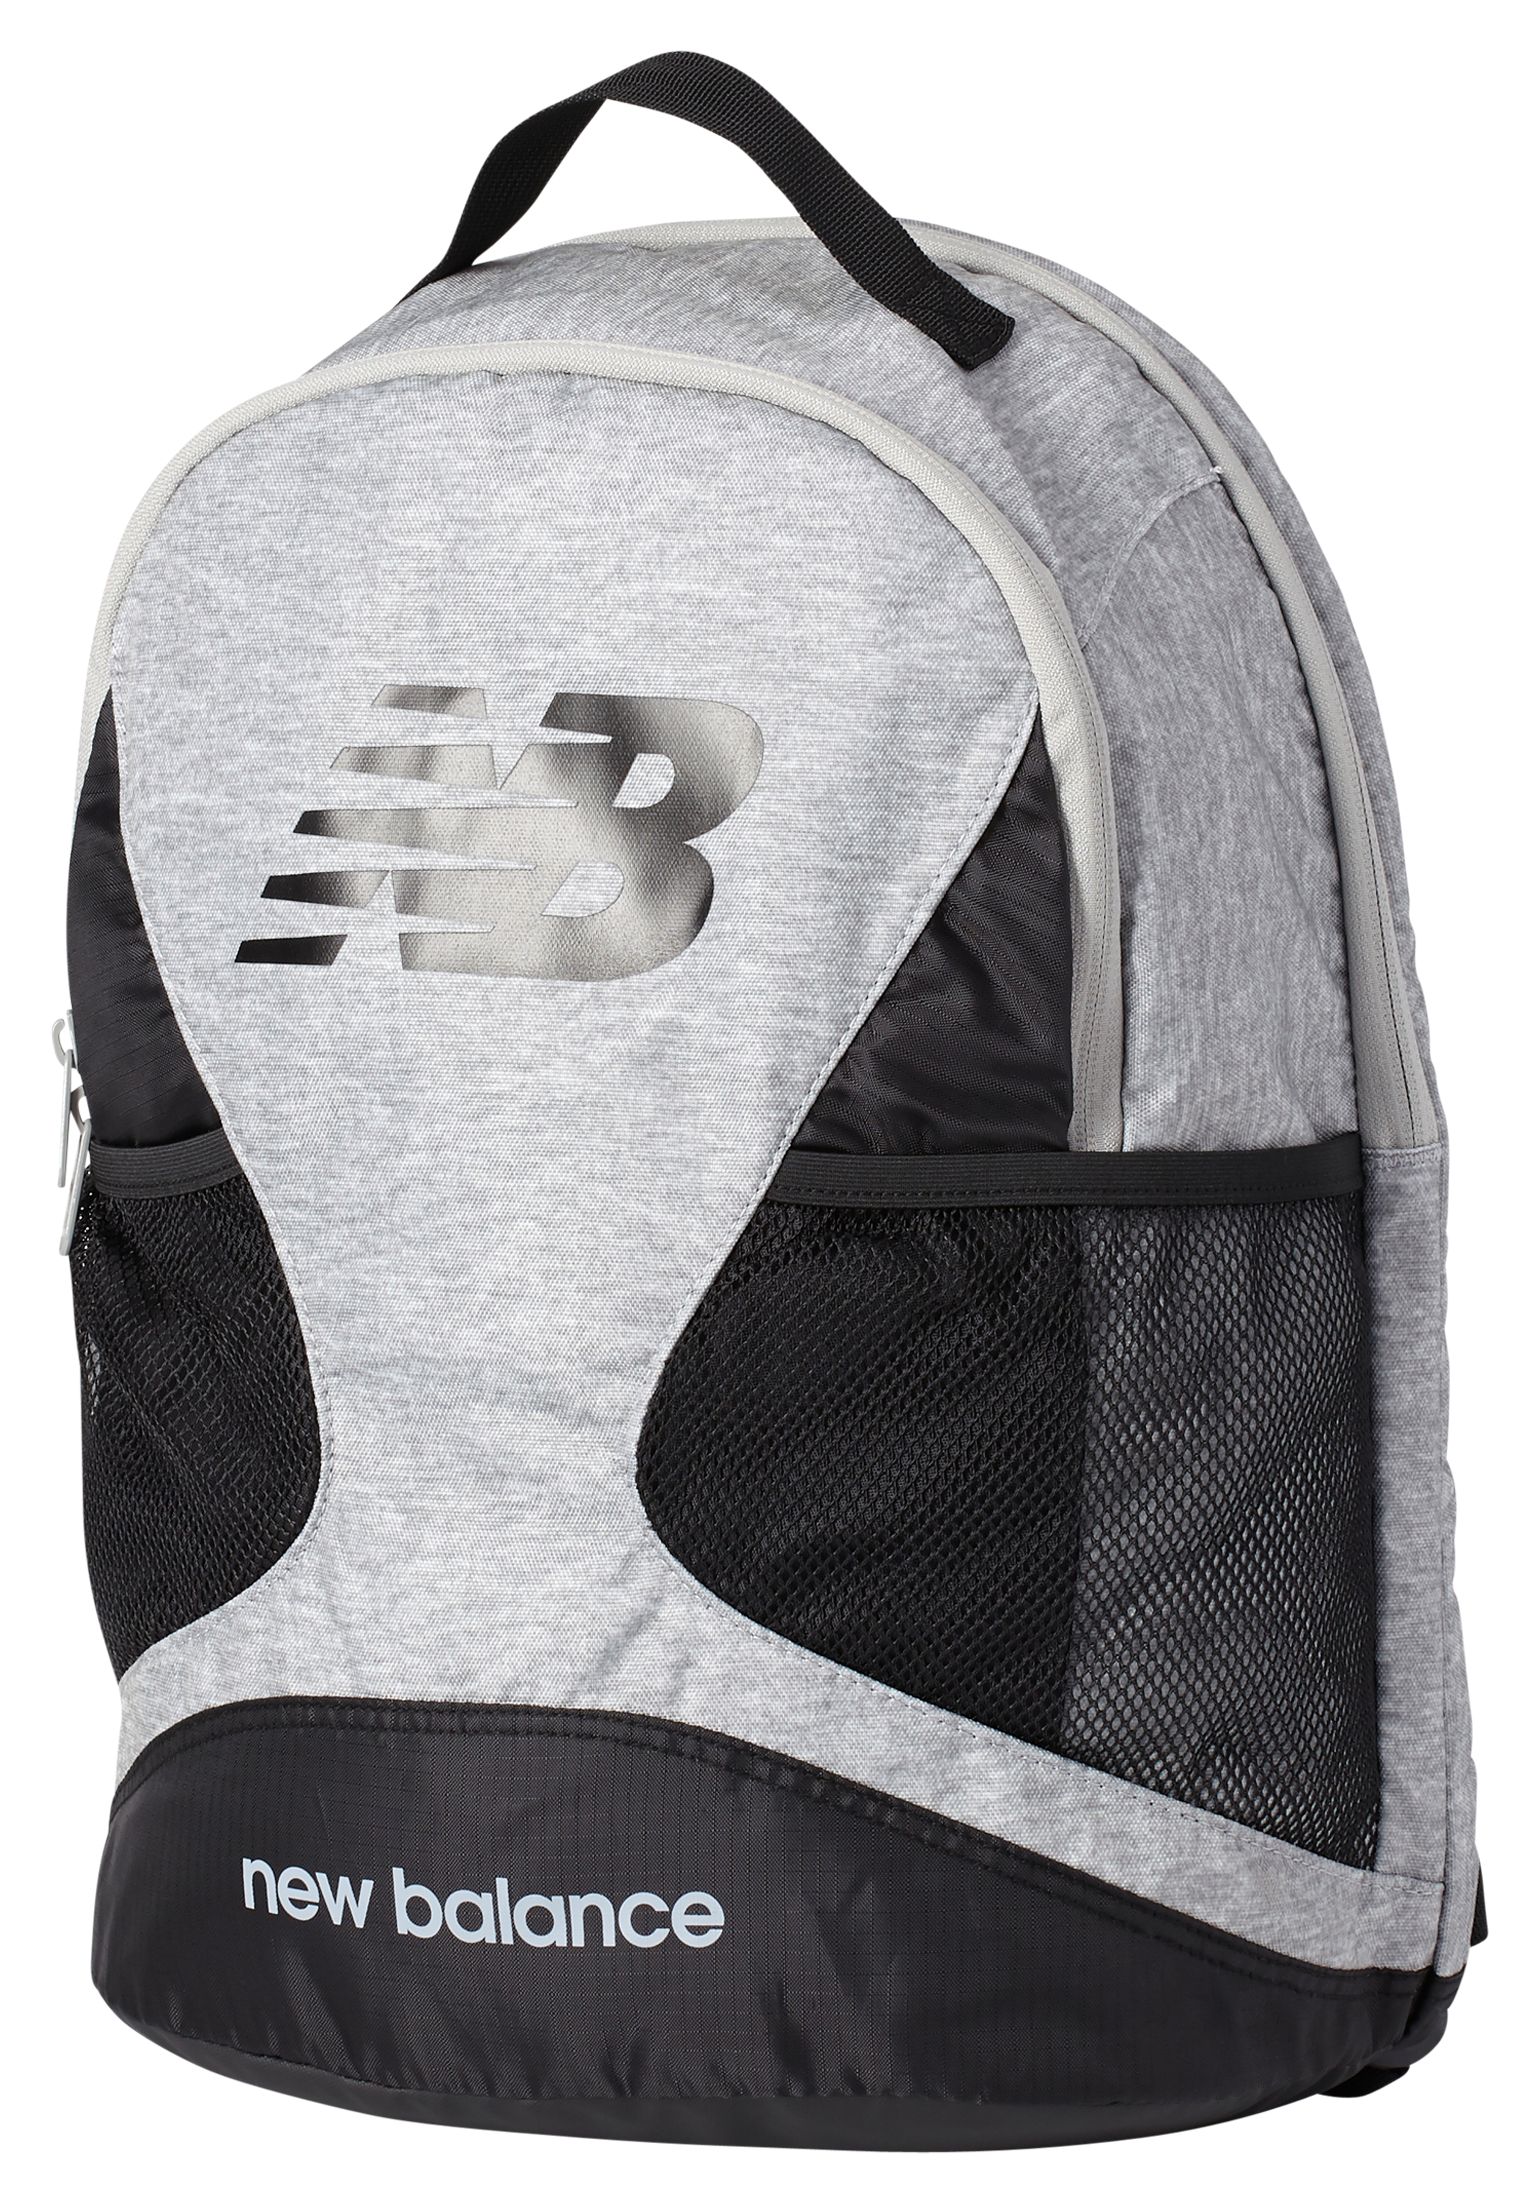 Athletic Backpacks & Gym Bags for Men New Balance